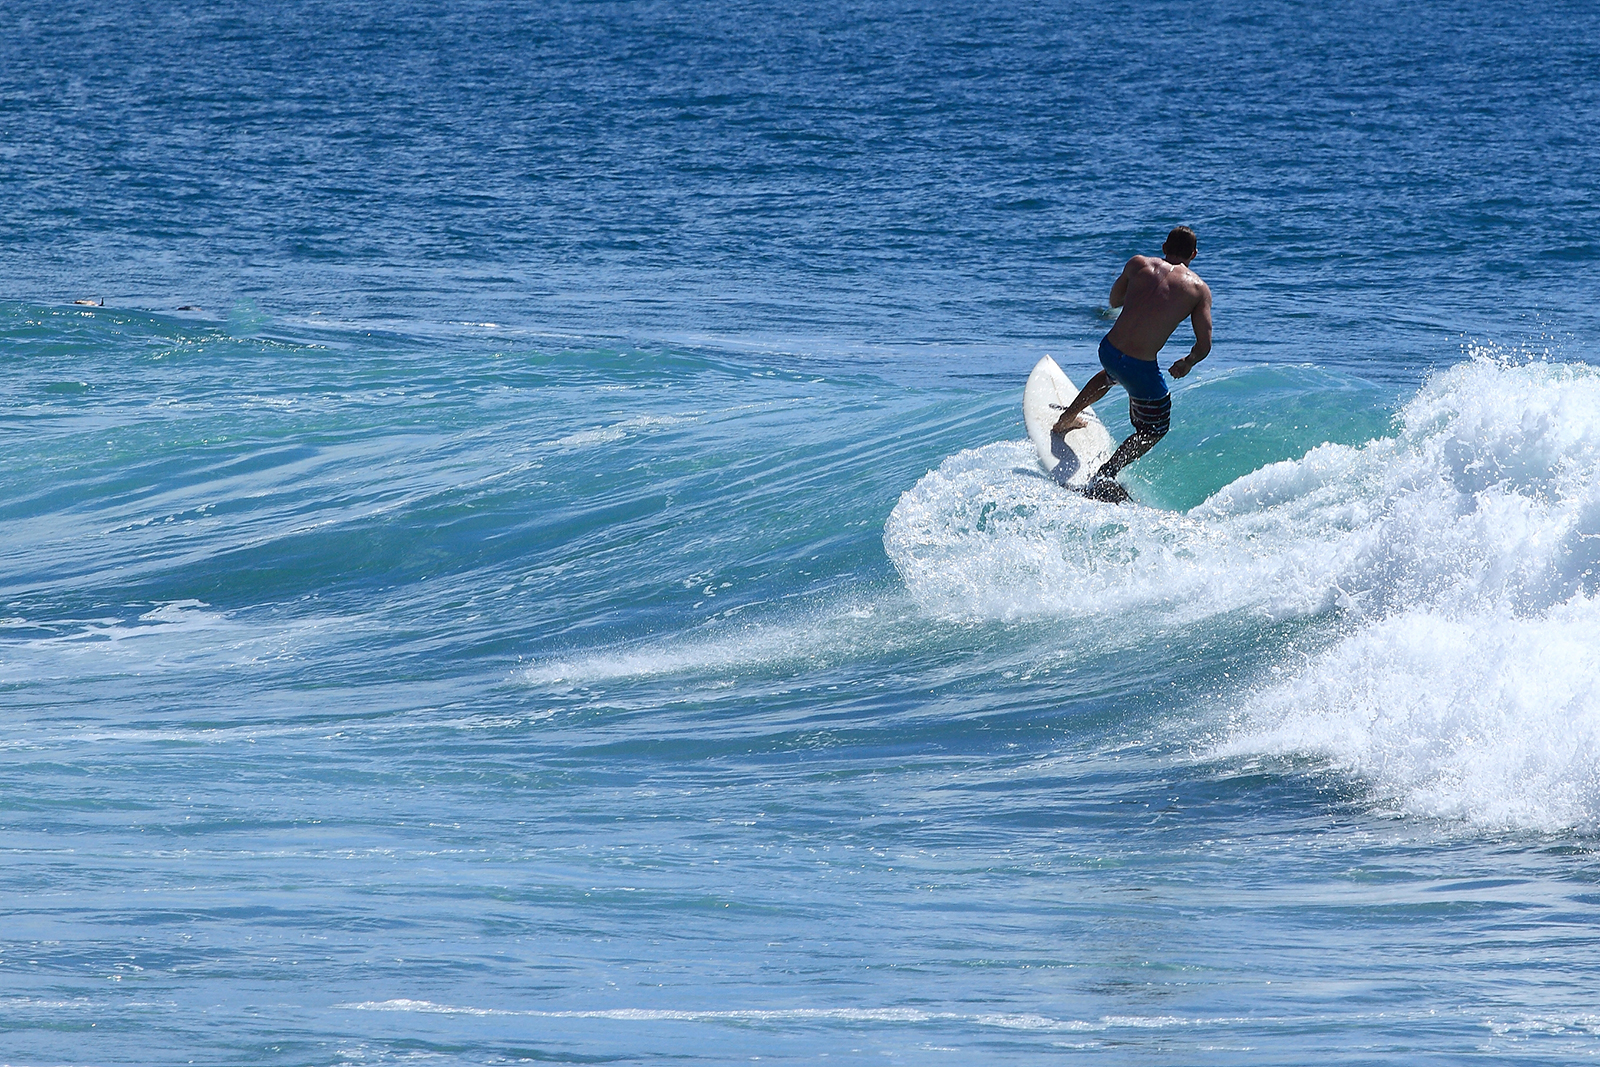 Brisbane attracts surfers from around the world with beaches that can offer excellent surfing. /IC